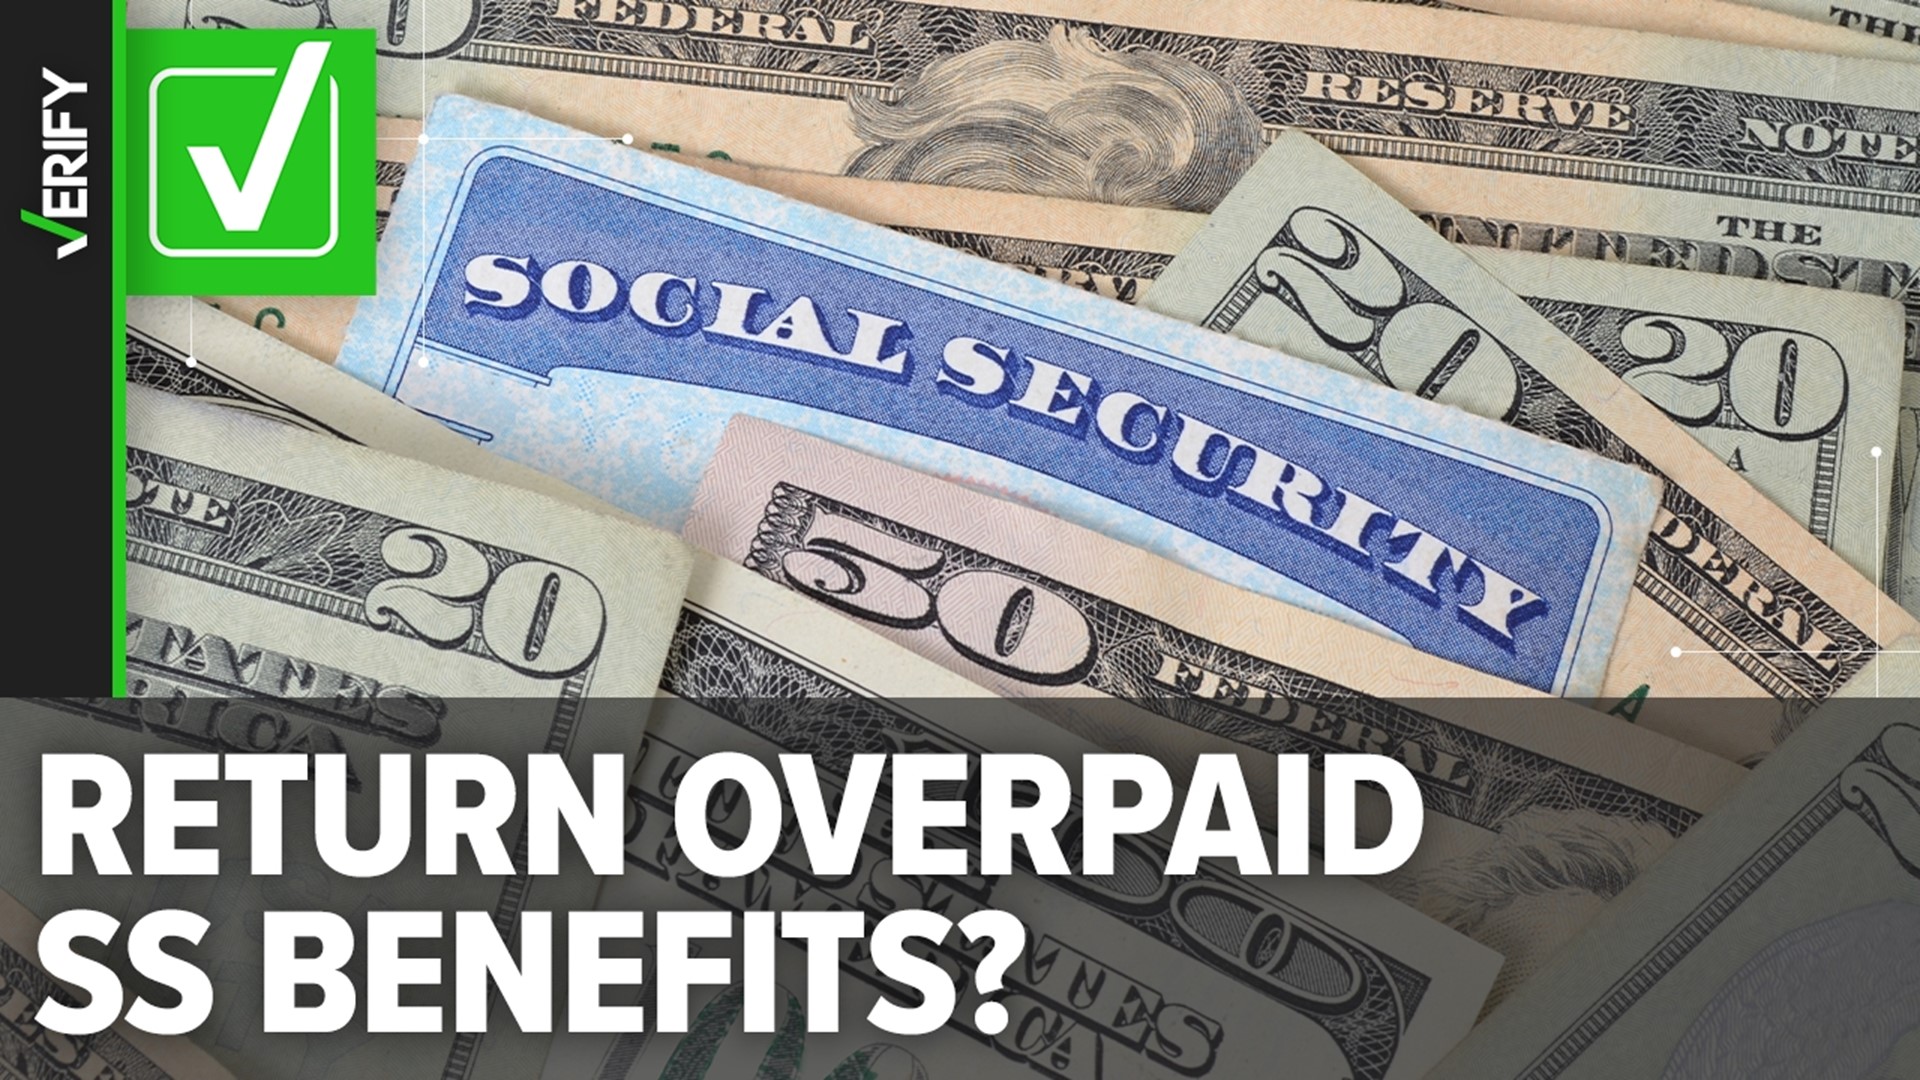 Social Security sends overpayment notices to people who receive more in benefits than they should have been paid. This is more common within the SSI program.